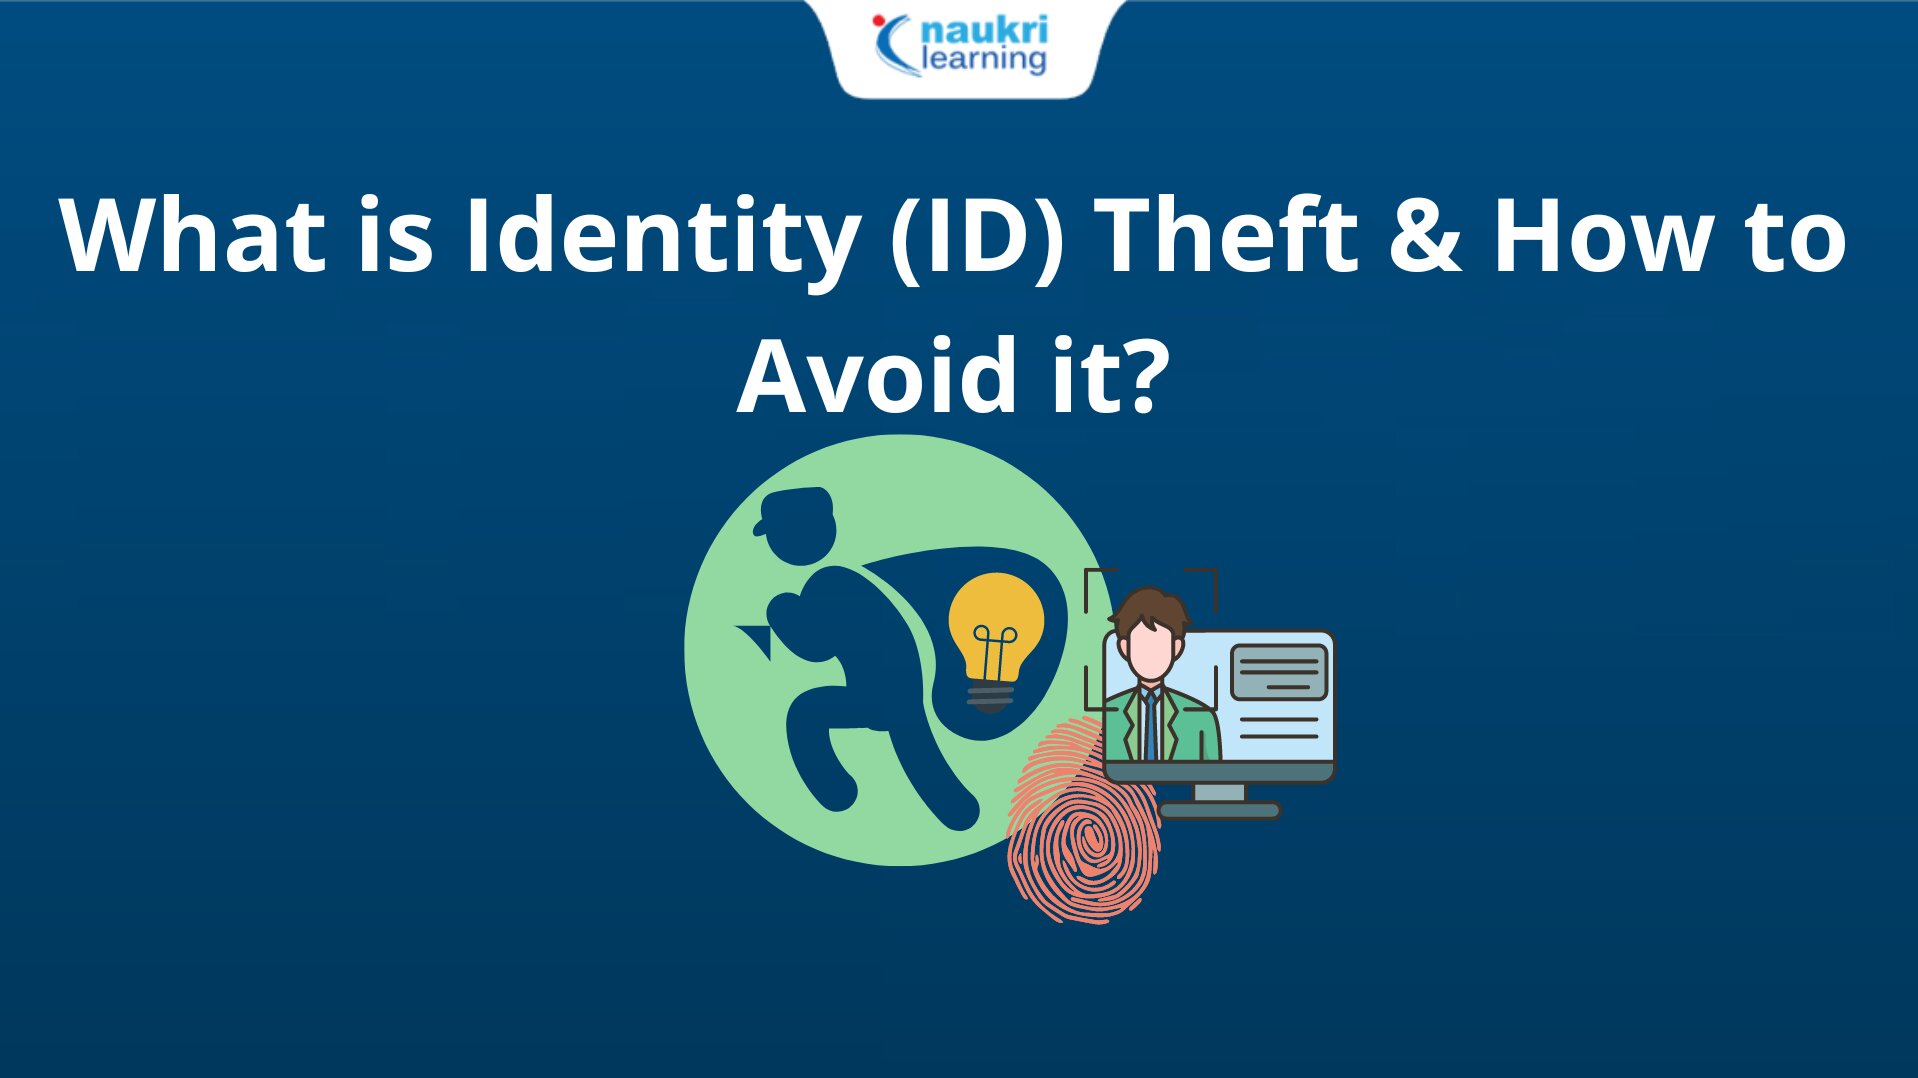 How to avoid identity theft online